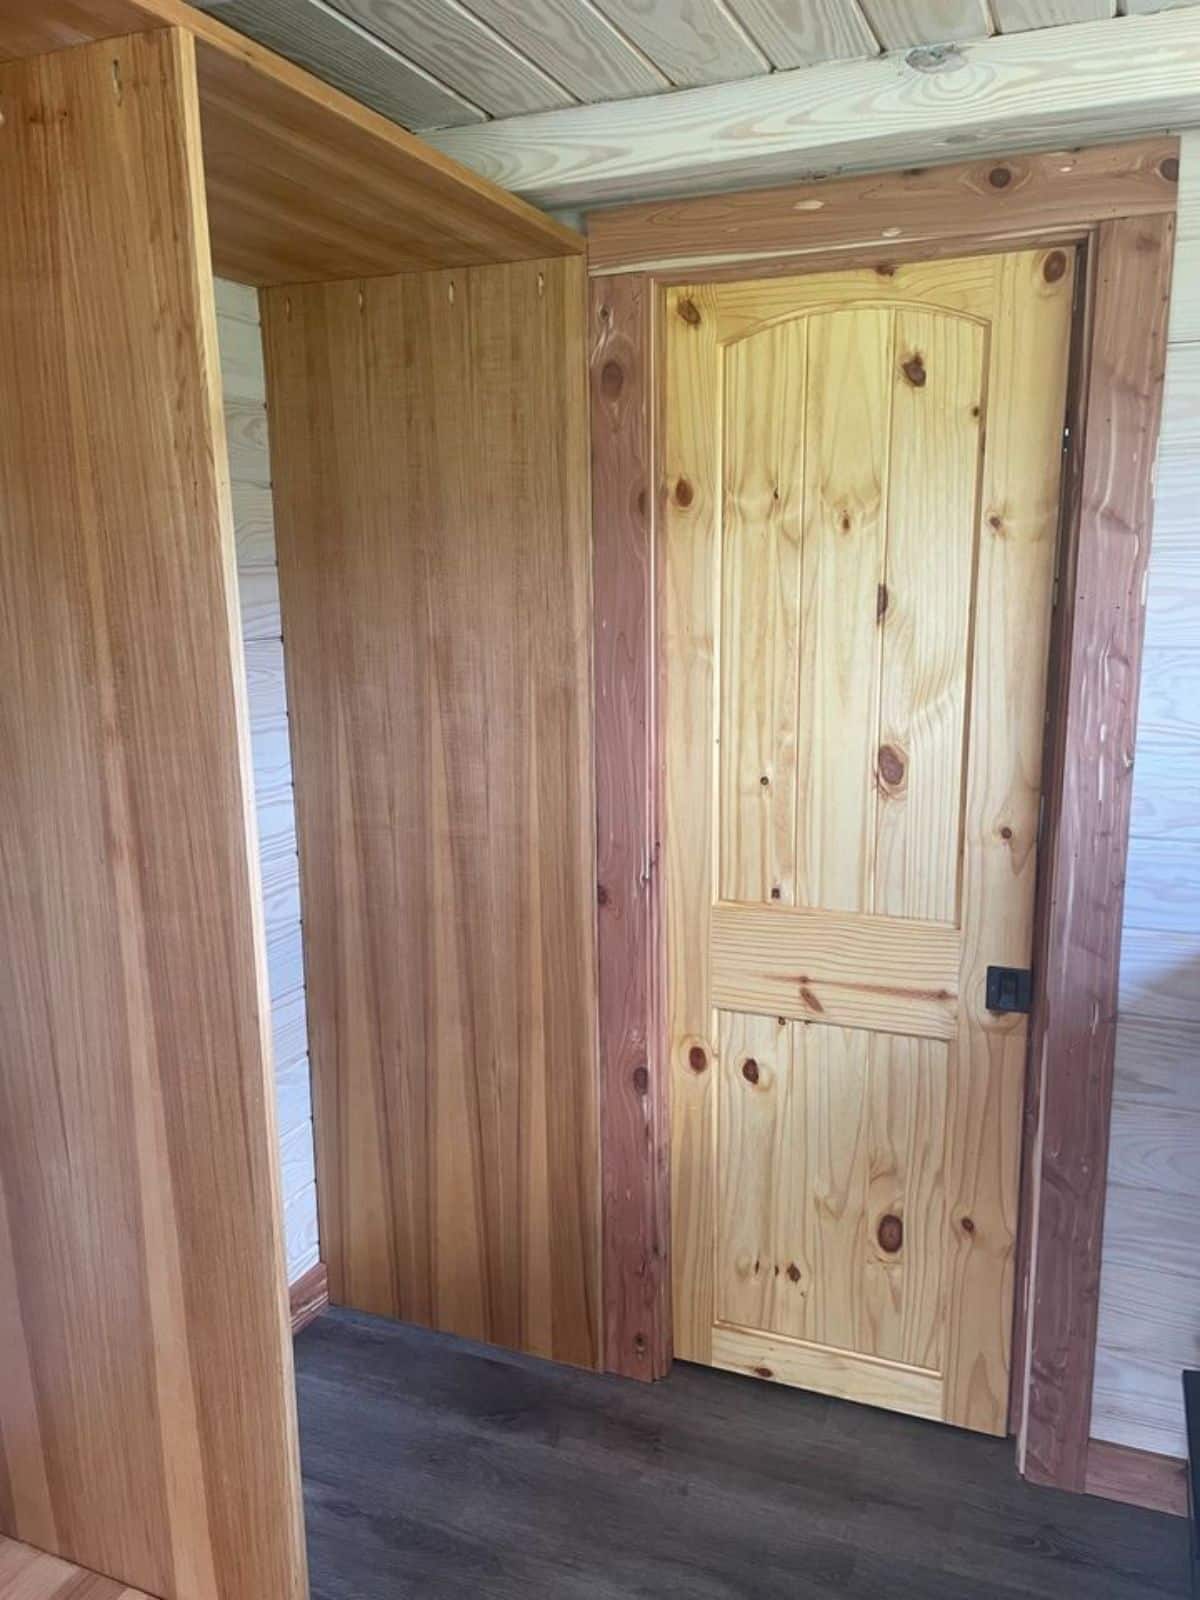 Insulated wooden walls, door and flooring of 326 sf Spacious Tiny House